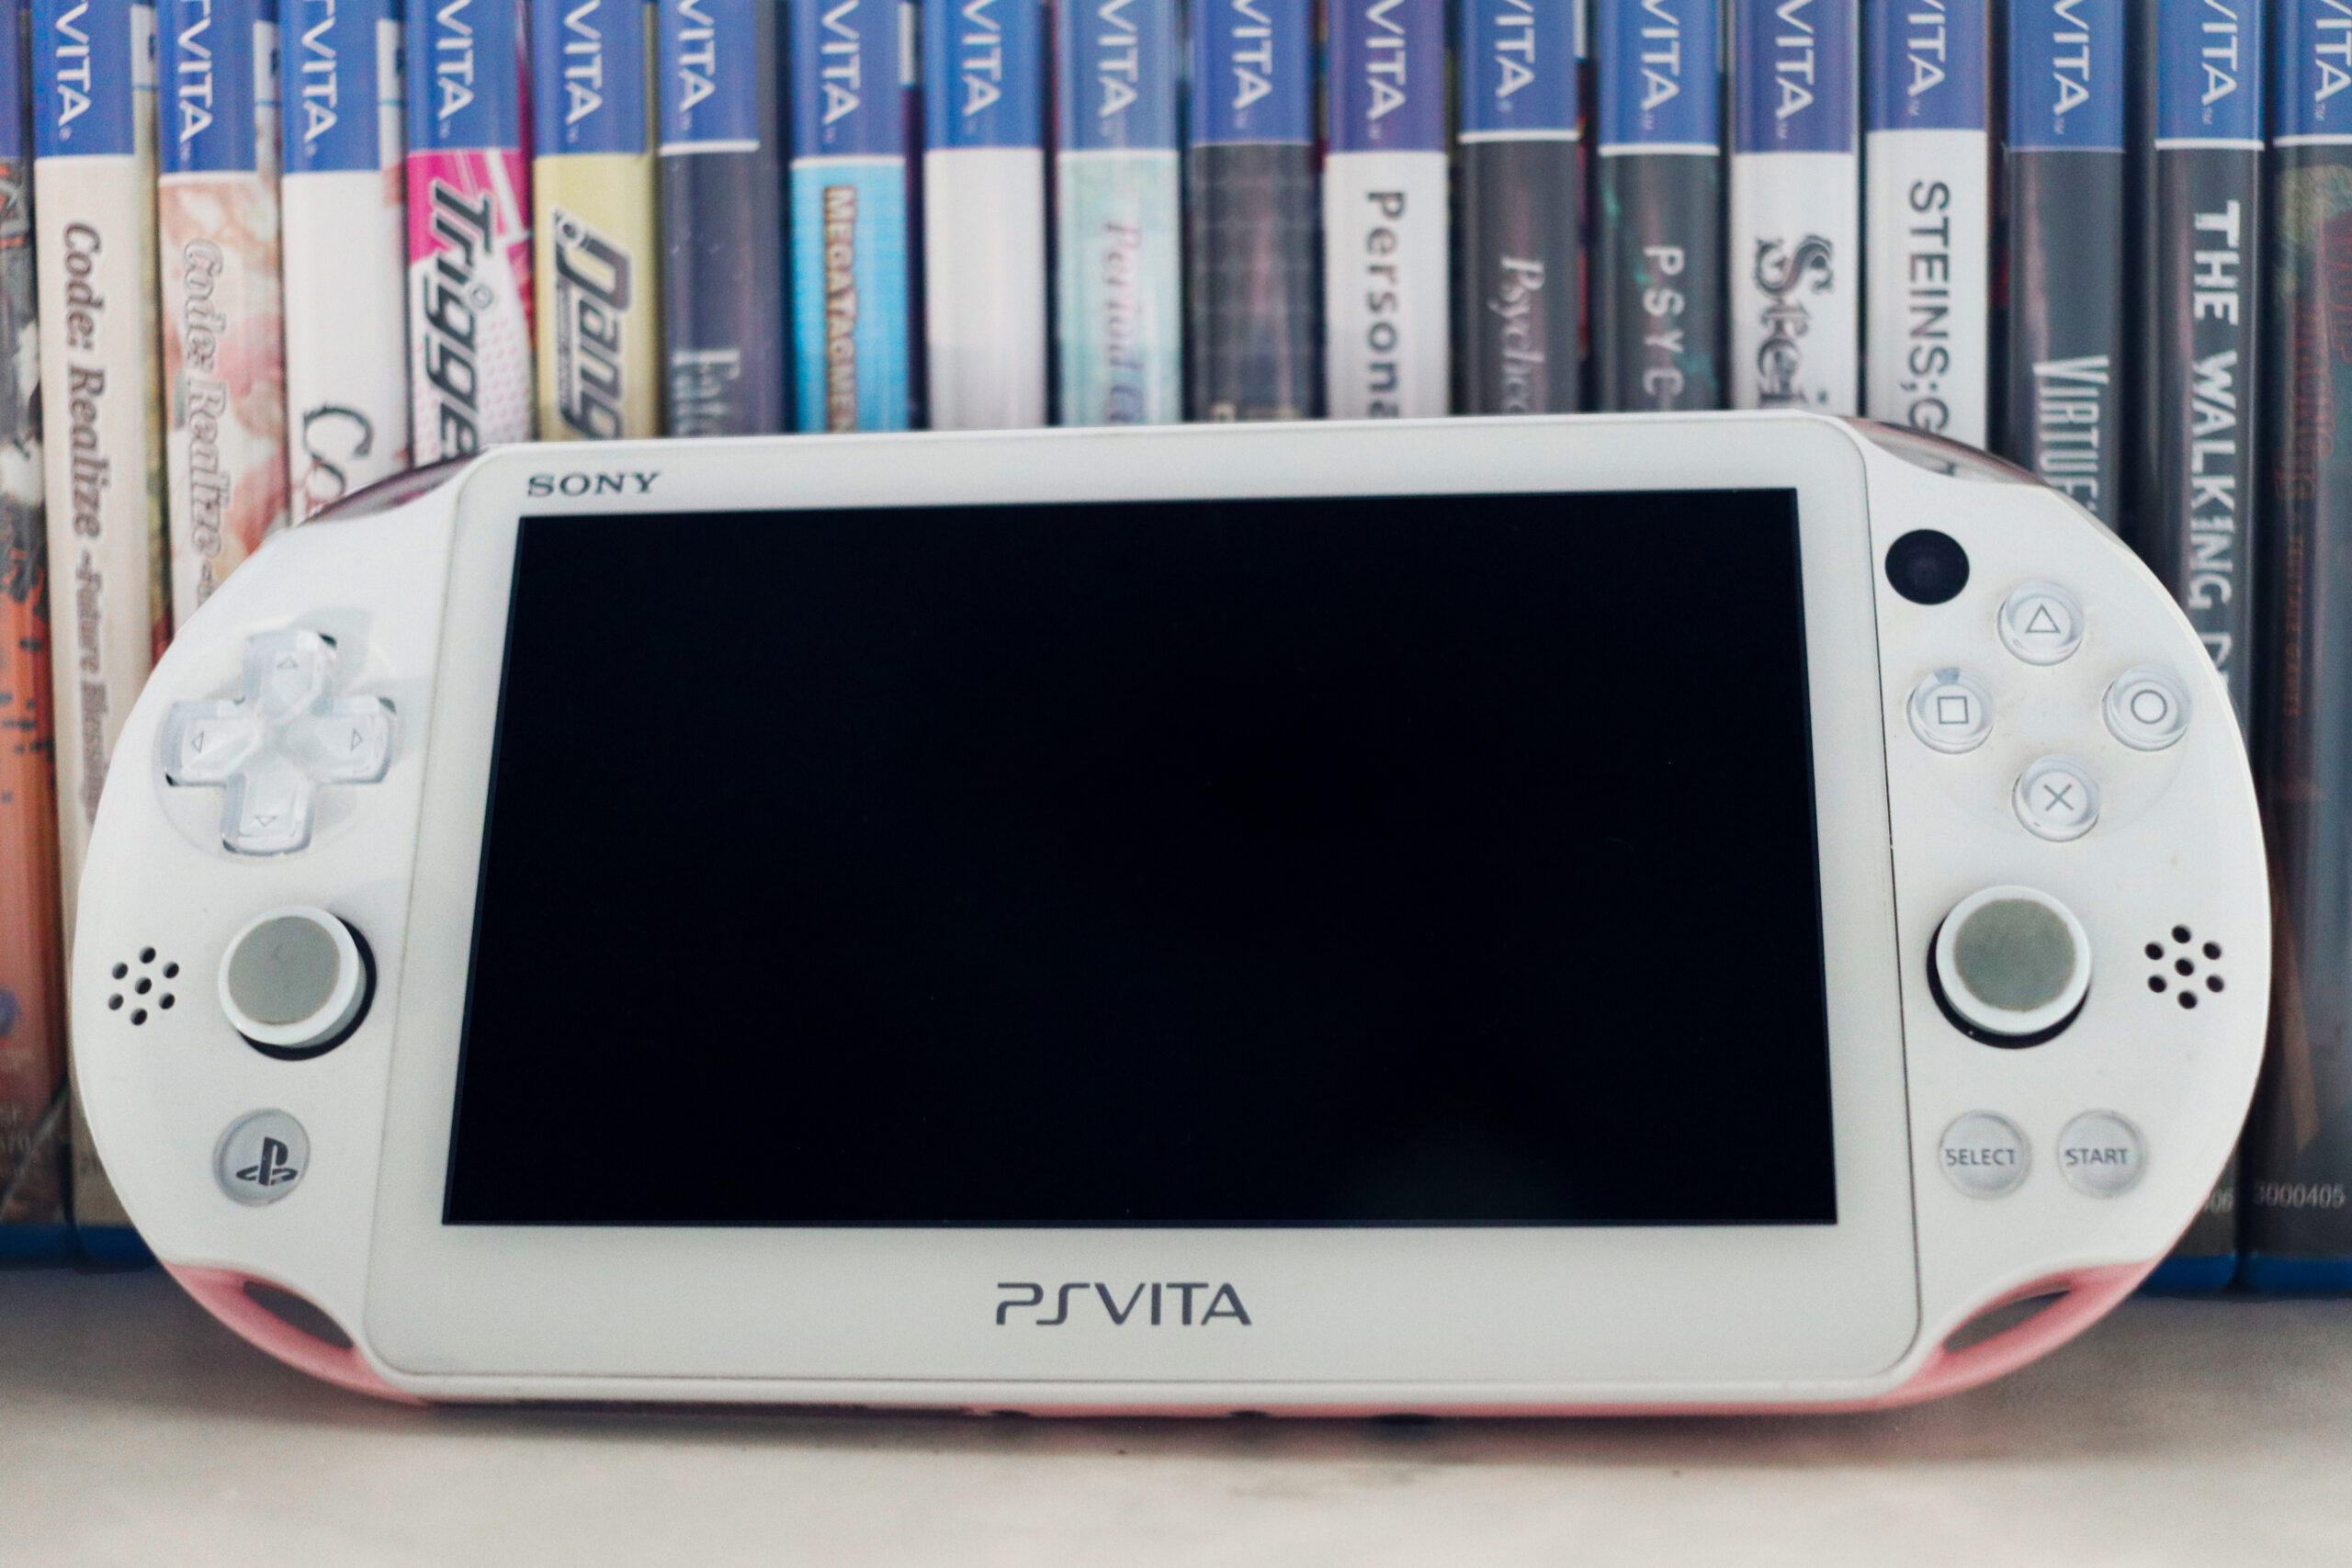 Geek insider, geekinsider, geekinsider. Com,, sony ps vita is one of 2012's worst product flops, news